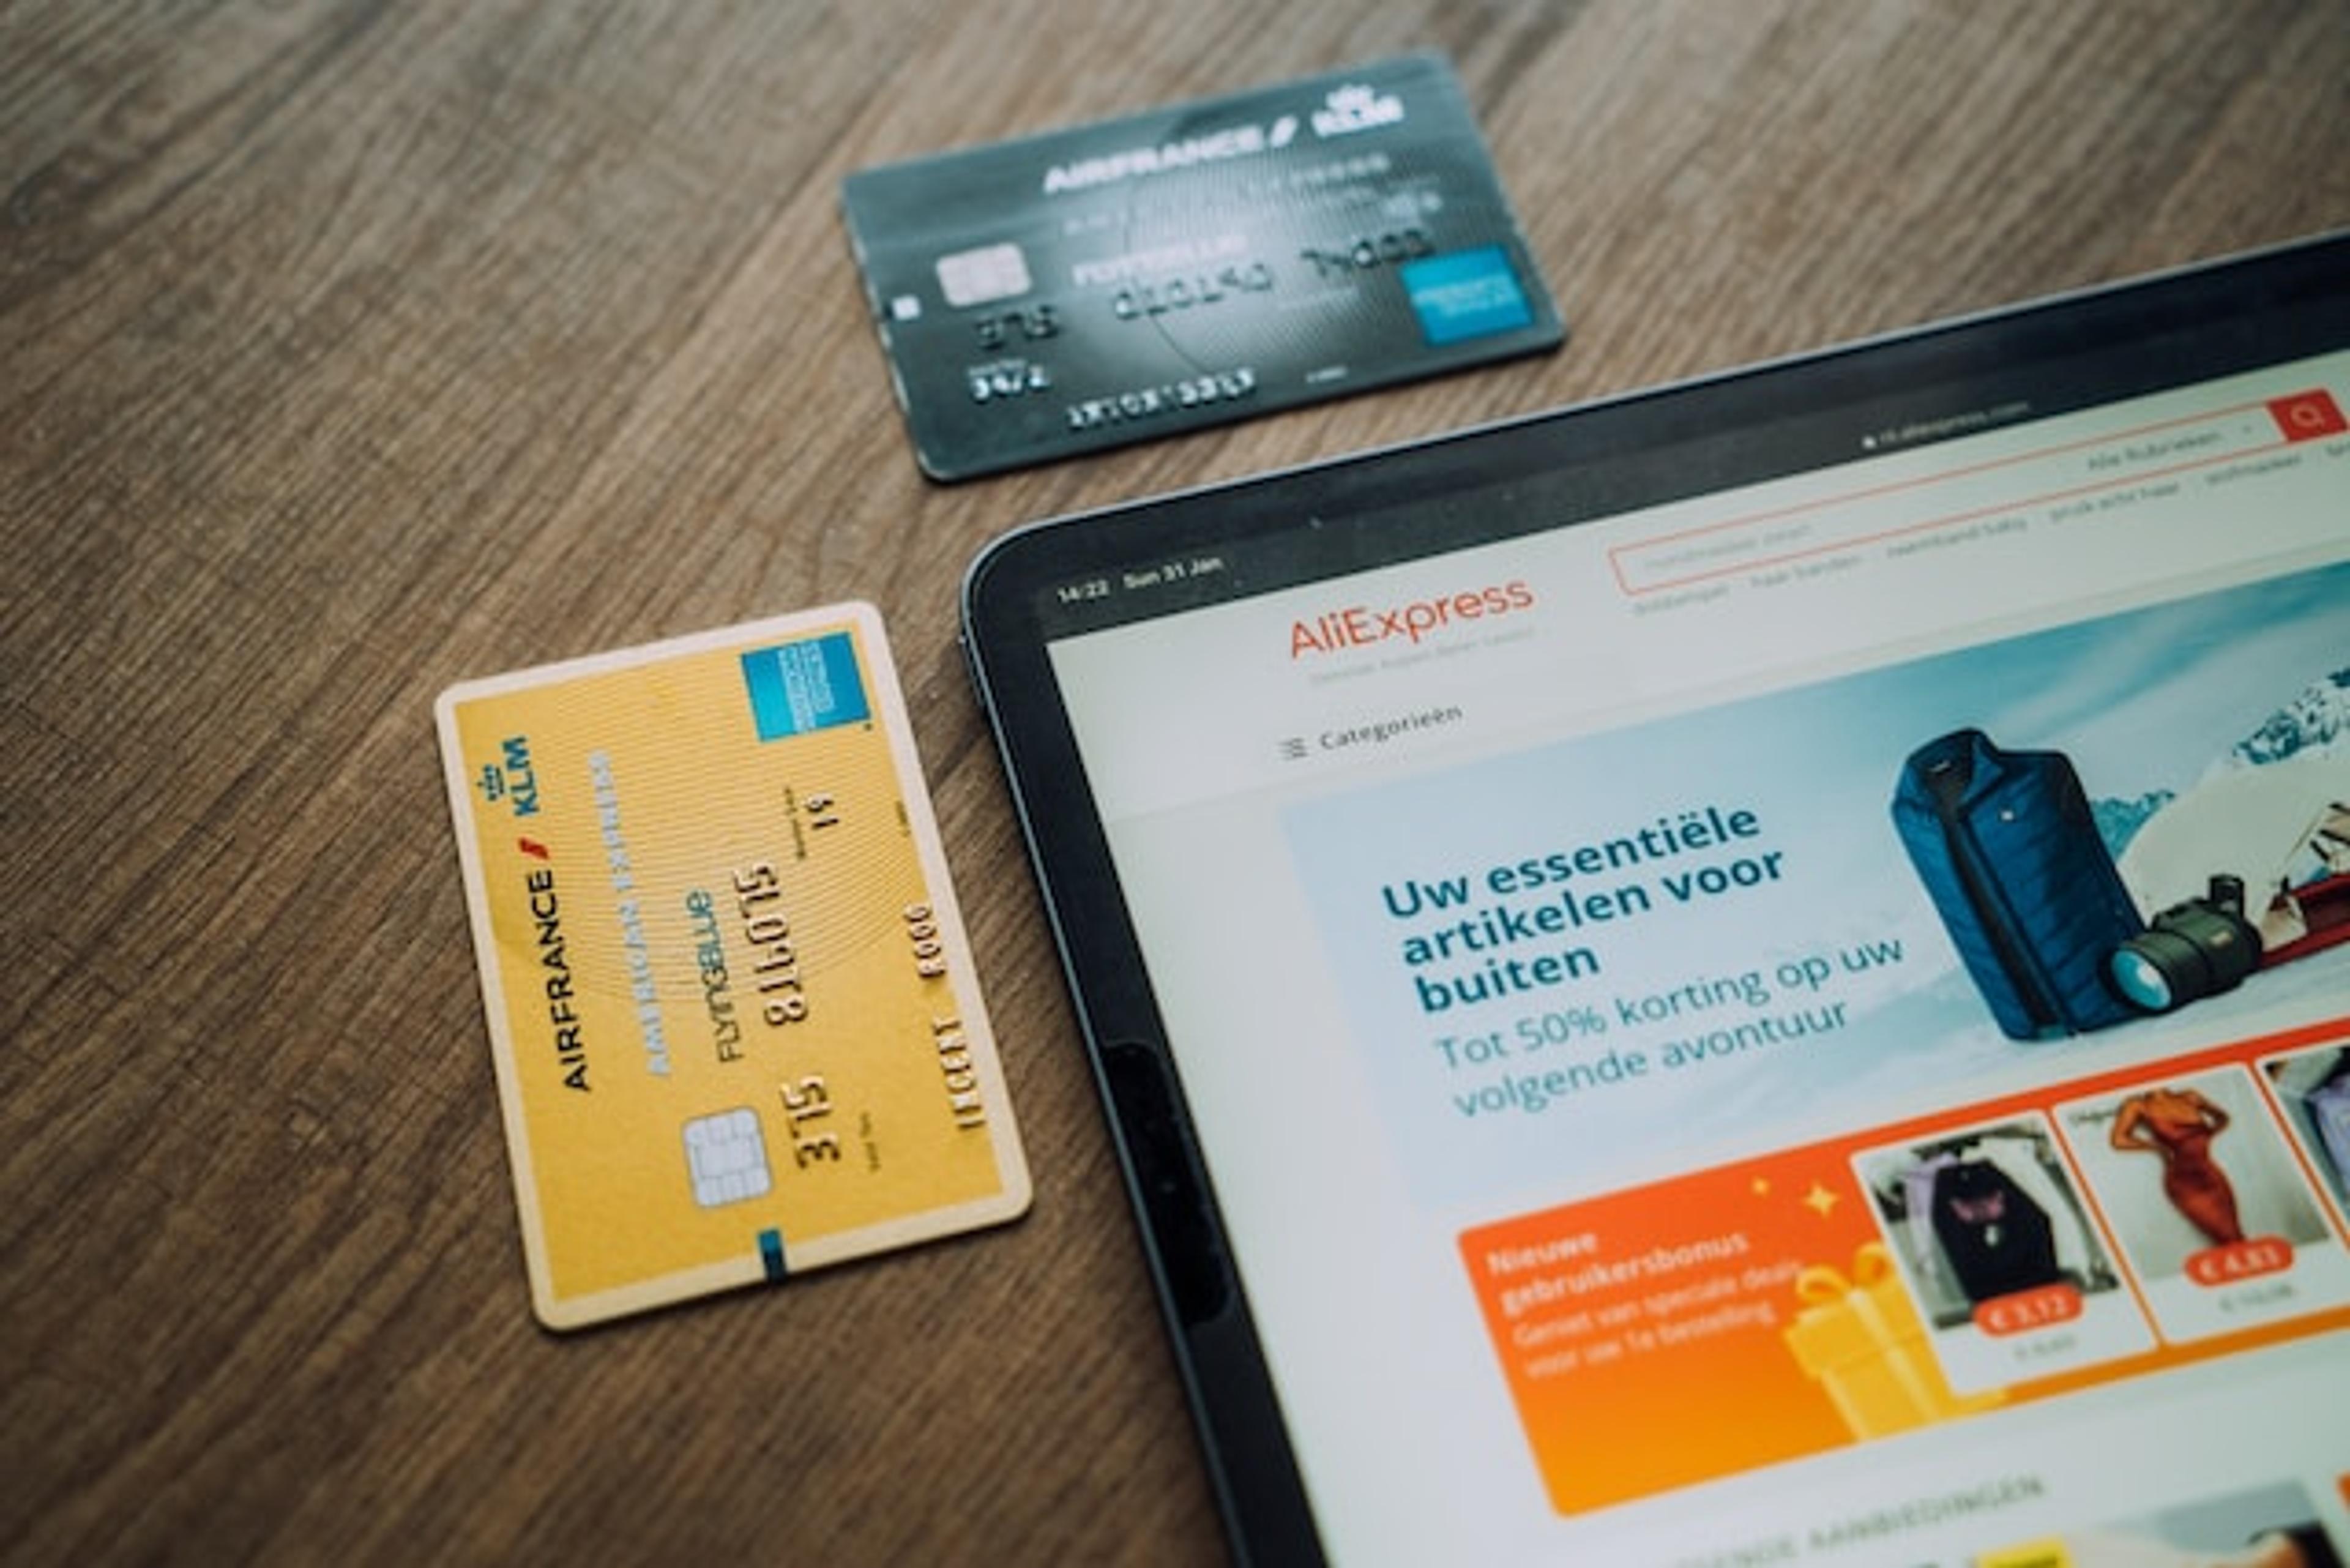 A tablet displaying Aliexpress site beside multiple credit cards.